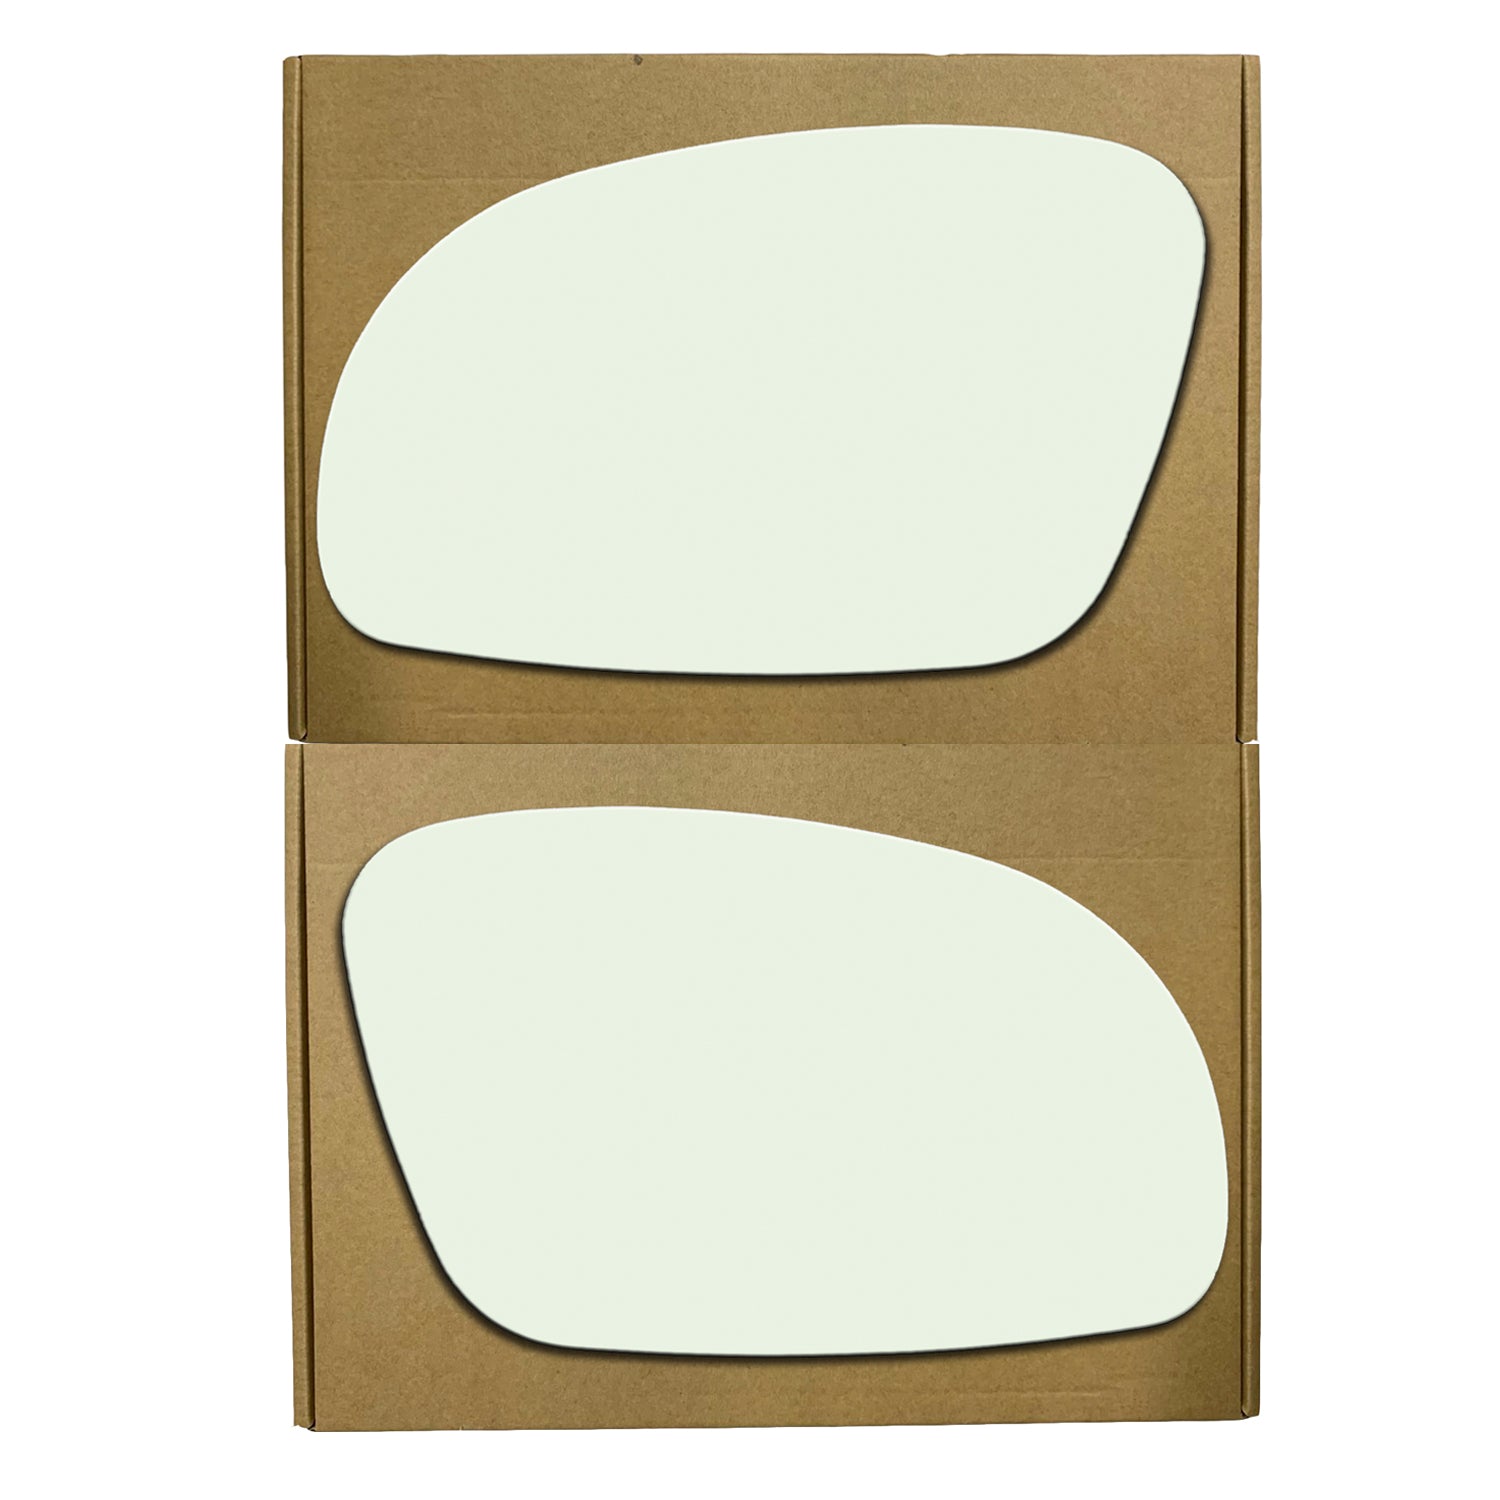 WLLW Replacement Mirror Glass for 2001-2010 Volkswagen Beetle, Driver Left Side LH/Passenger Right Side RH/The Both Sides Flat Convex M-0081